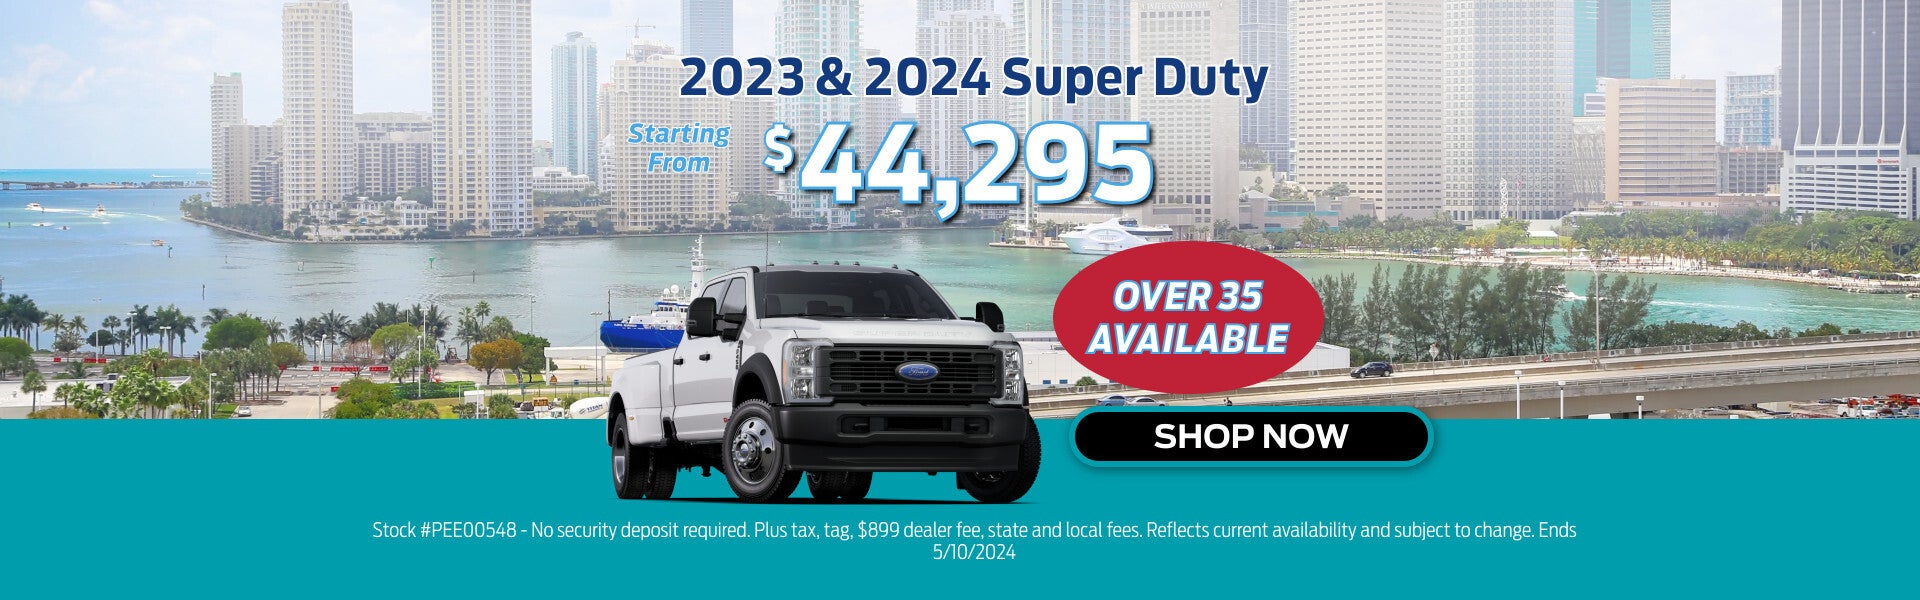 2023 and 2024 Super Duty, starting from $44,295